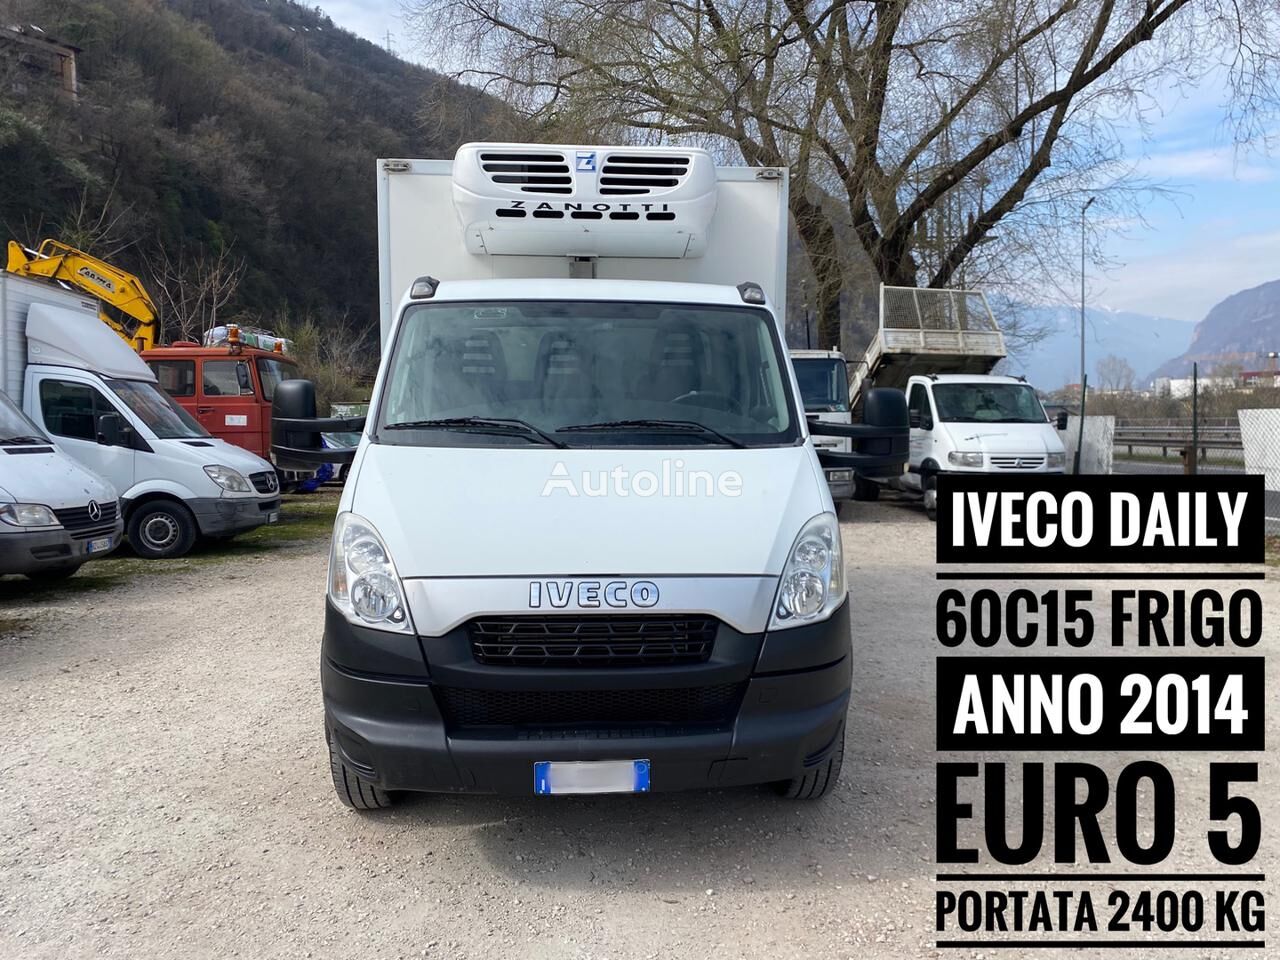 IVECO Daily 60C15 refrigerated truck